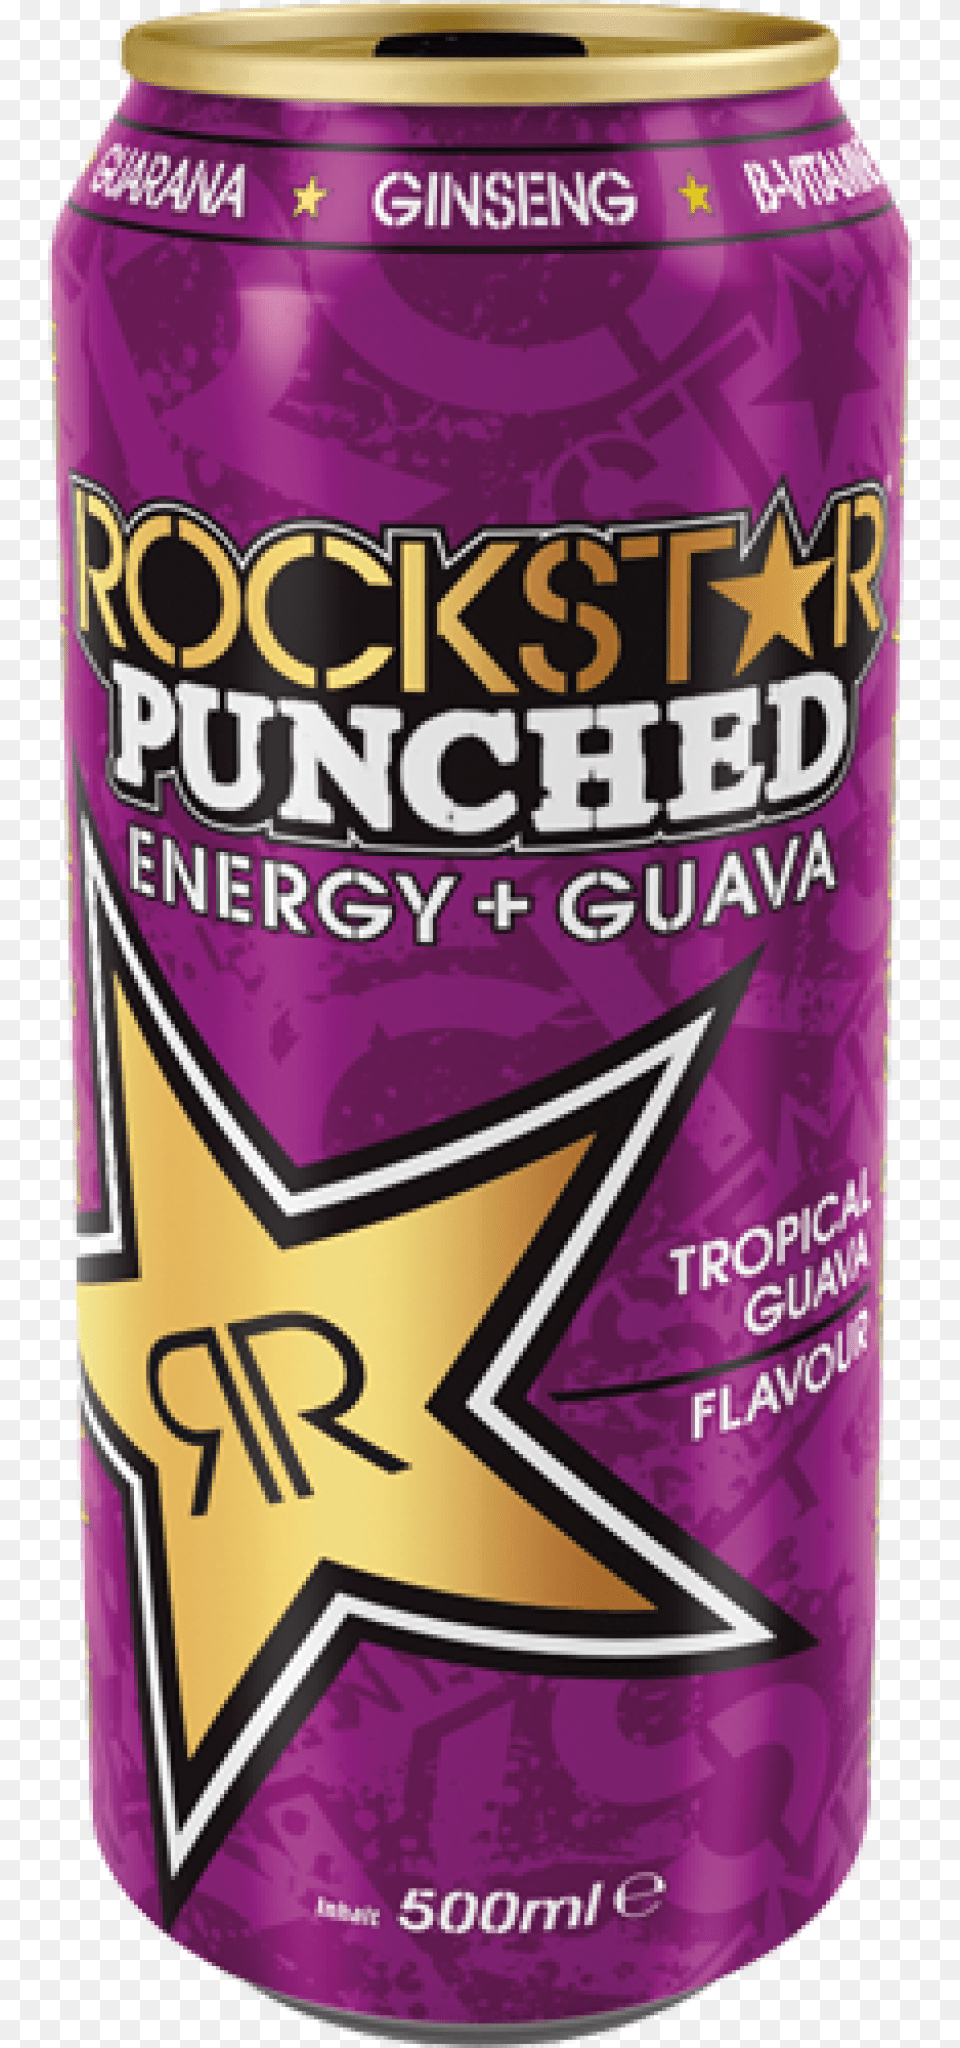 Rockstar Punched Energy Guava 05 Liter 2009 Rockstar Energy Drink Fialov, Can, Tin, Alcohol, Beer Png